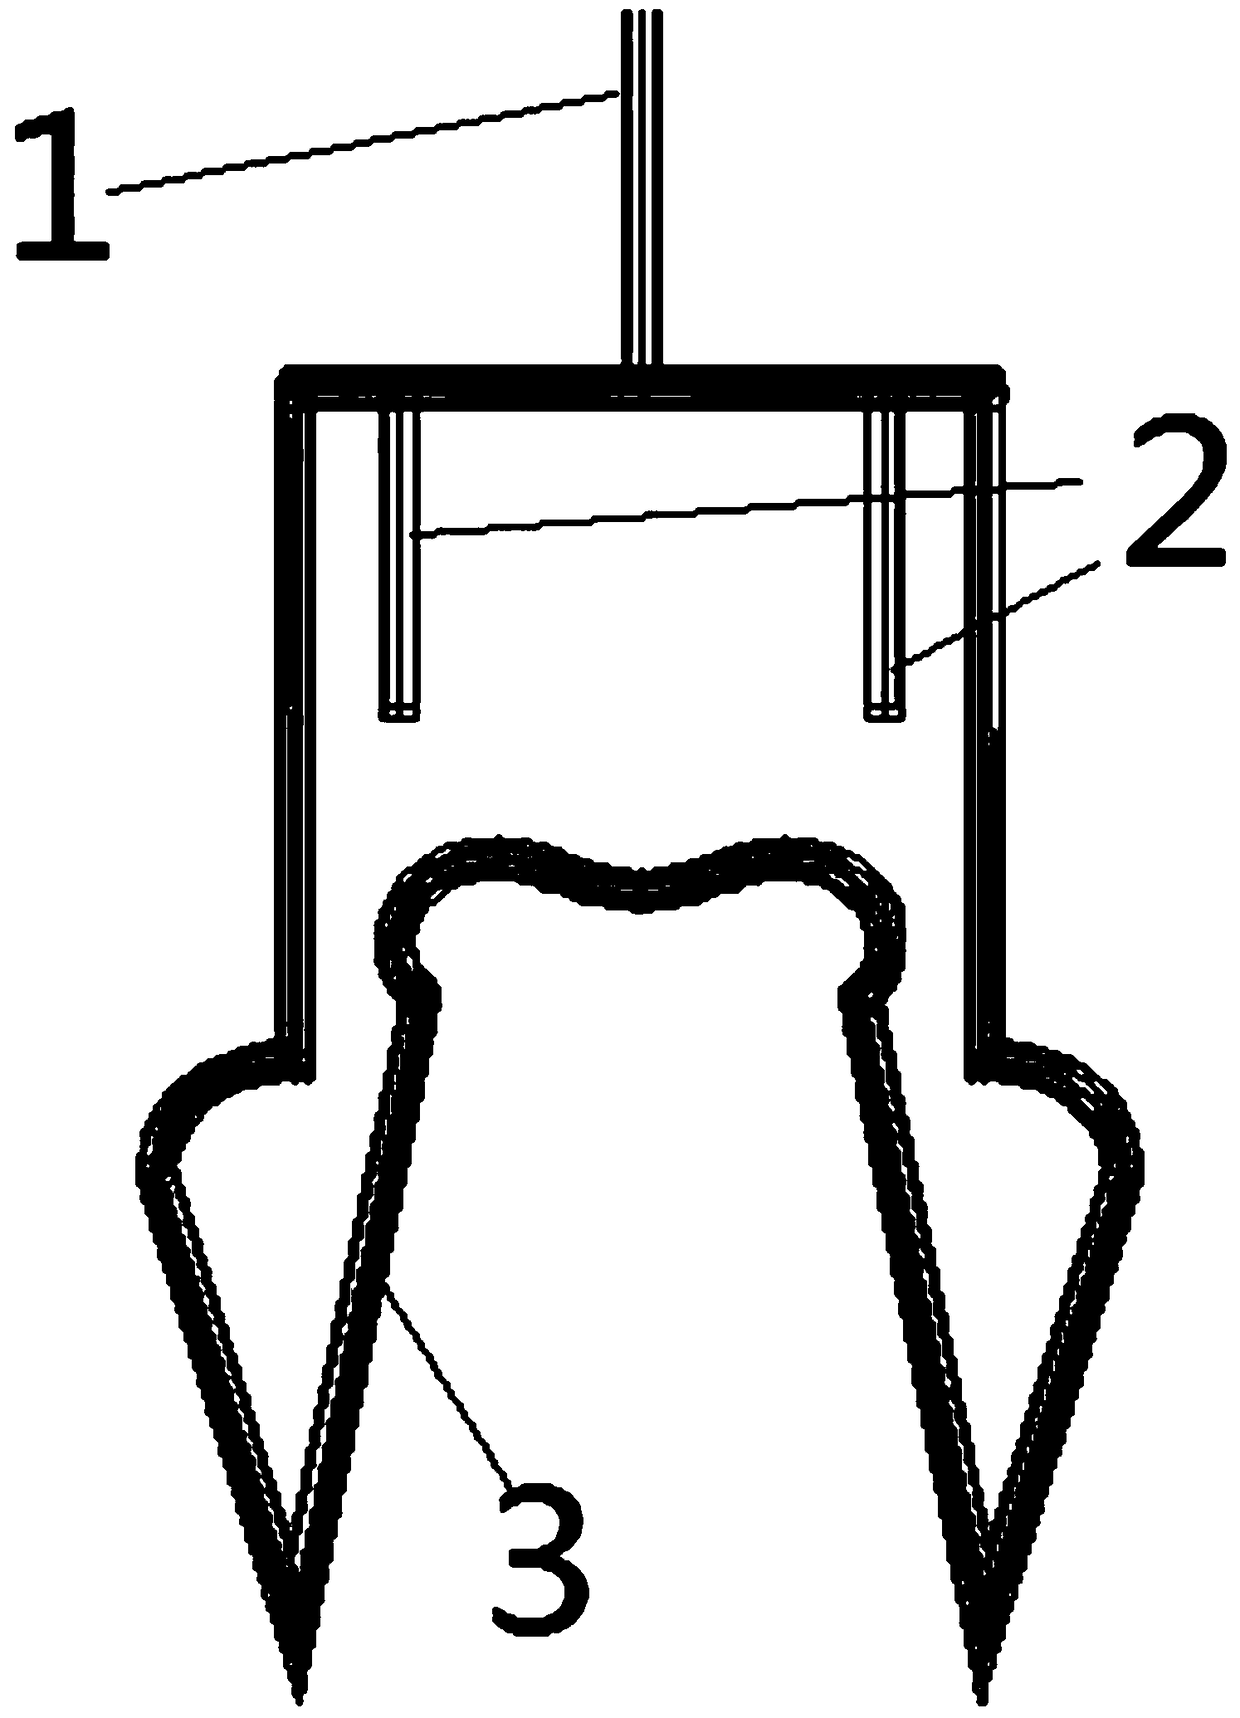 A method of using a wire-frame-shaped hexagonal screw clamping tool for installing an air conditioner